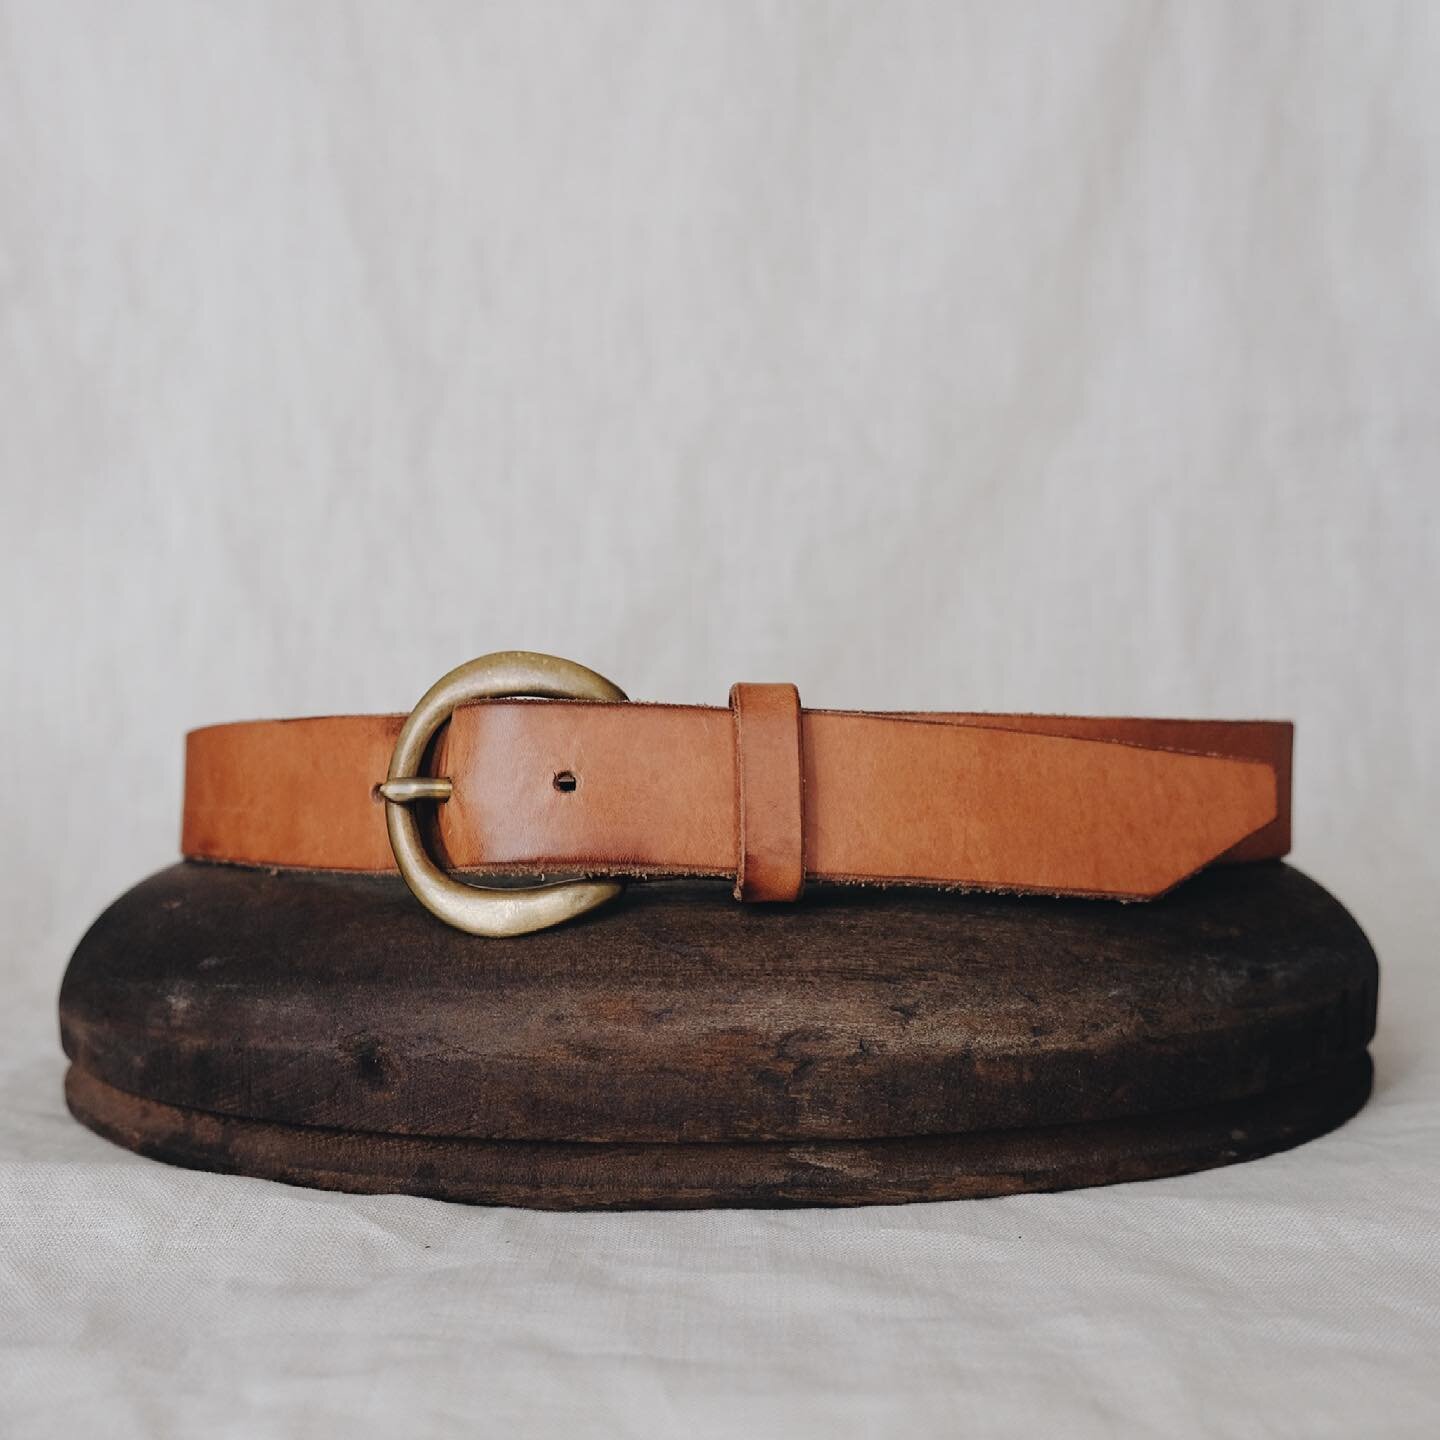 Classic unisex belt, regular width (1.25&rdquo;) in Natural. Unfinished solid brass buckle + vegetable tanned leather. Made to measure ☞ DM for info, order at guigo.shop. ⠀⠀⠀⠀⠀⠀⠀⠀⠀
&mdash;
#handmade #handcrafted #traditional #slowdesign #slowfashion 